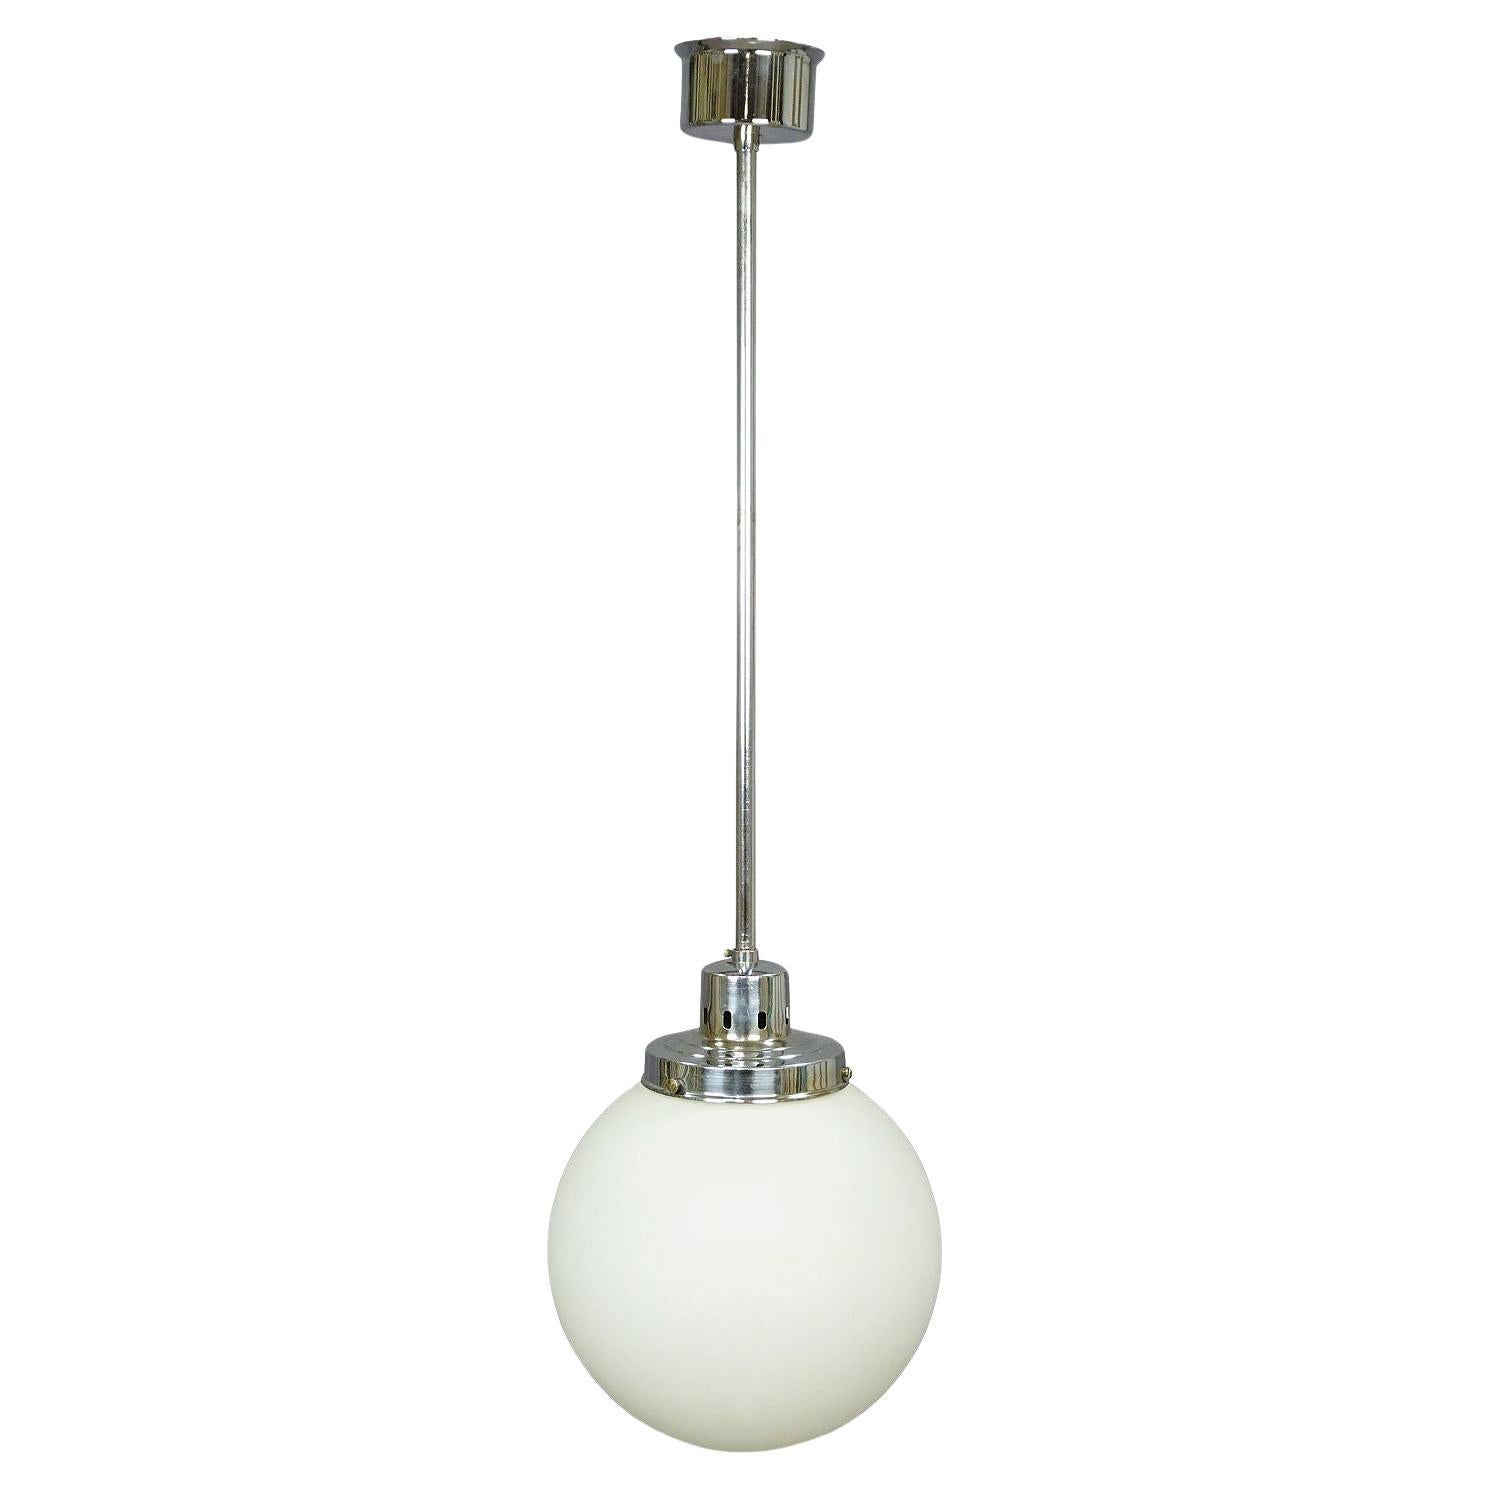 Antique Bauhaus Style Pendant Light with Opaline Glass Shade For Sale